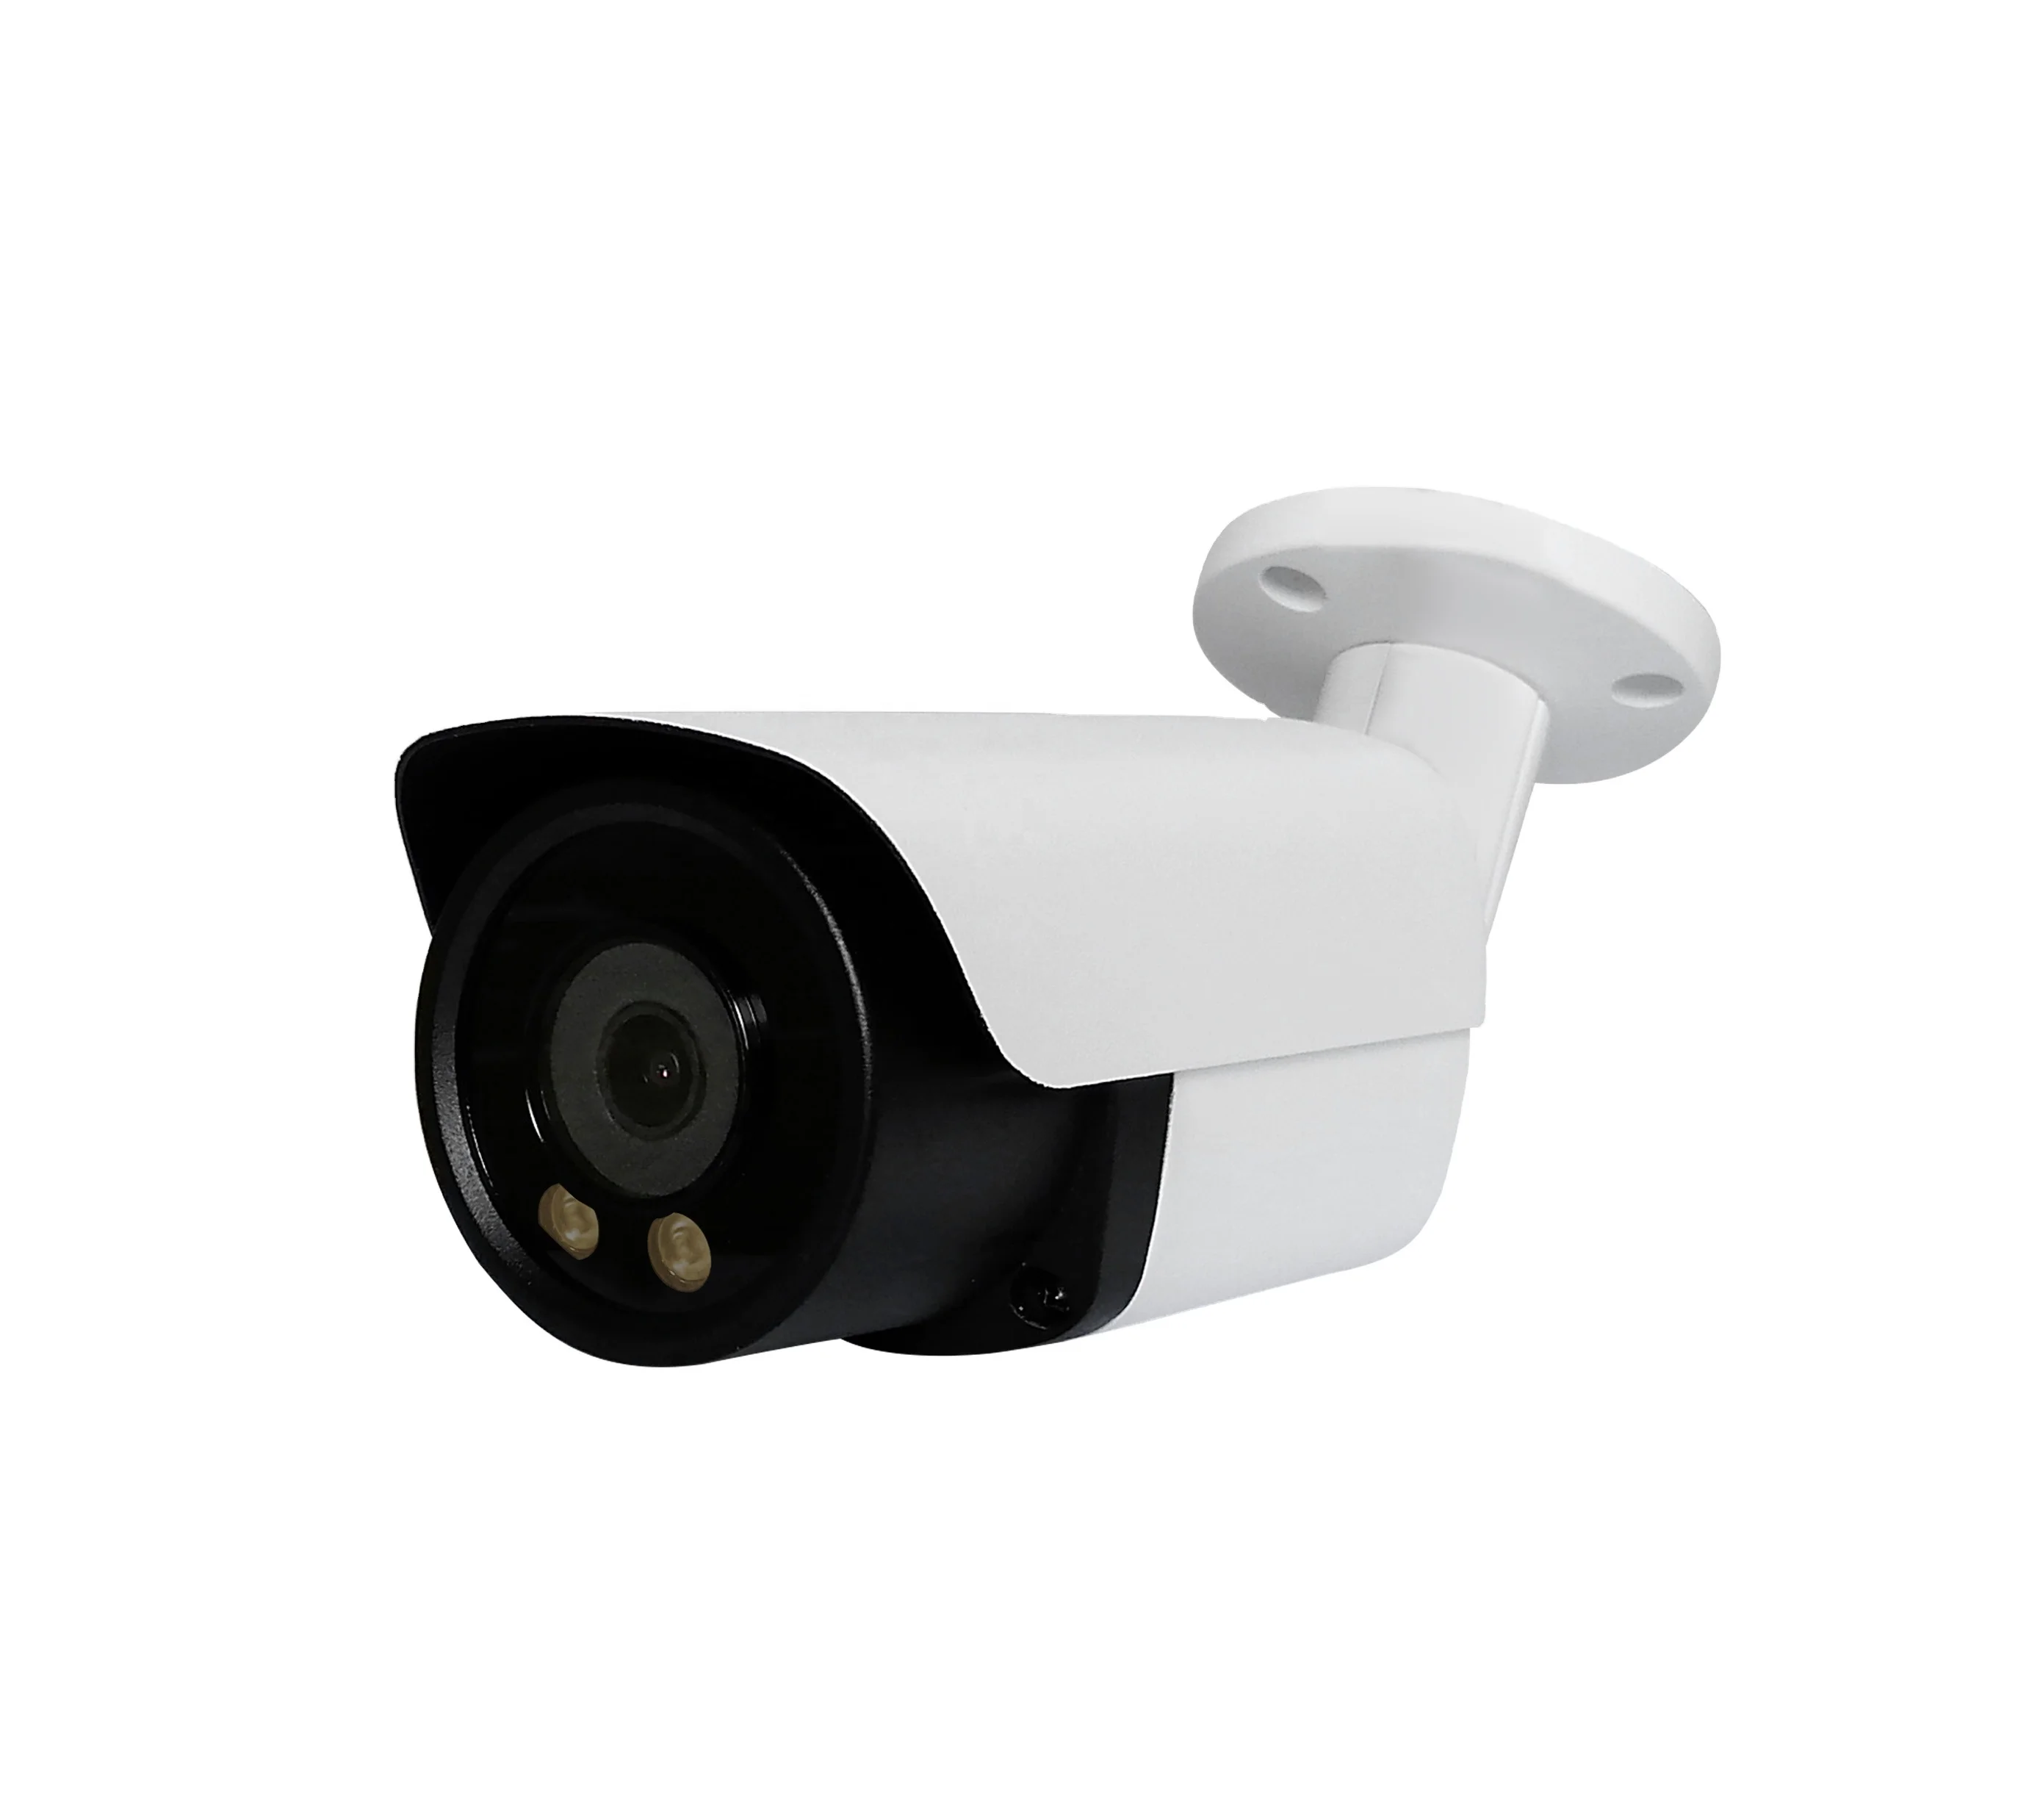 

8MP 4K Full Colour Vision Dome IP Camera F1.0 Starlight Lens 24 Hours Color Image View Two way video + Motion Detection